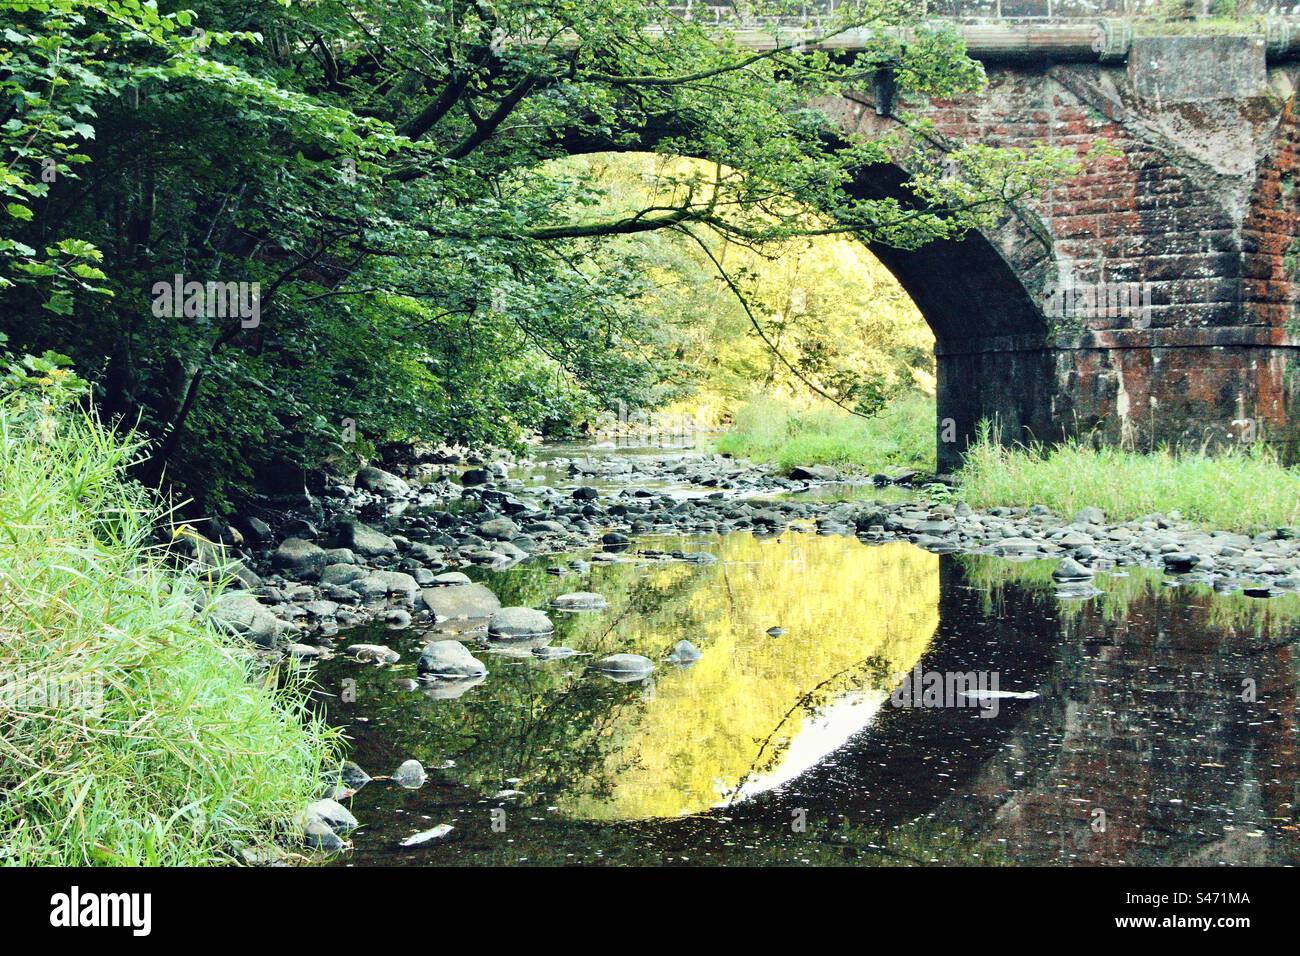 River Ayr Reflections Foto Stock